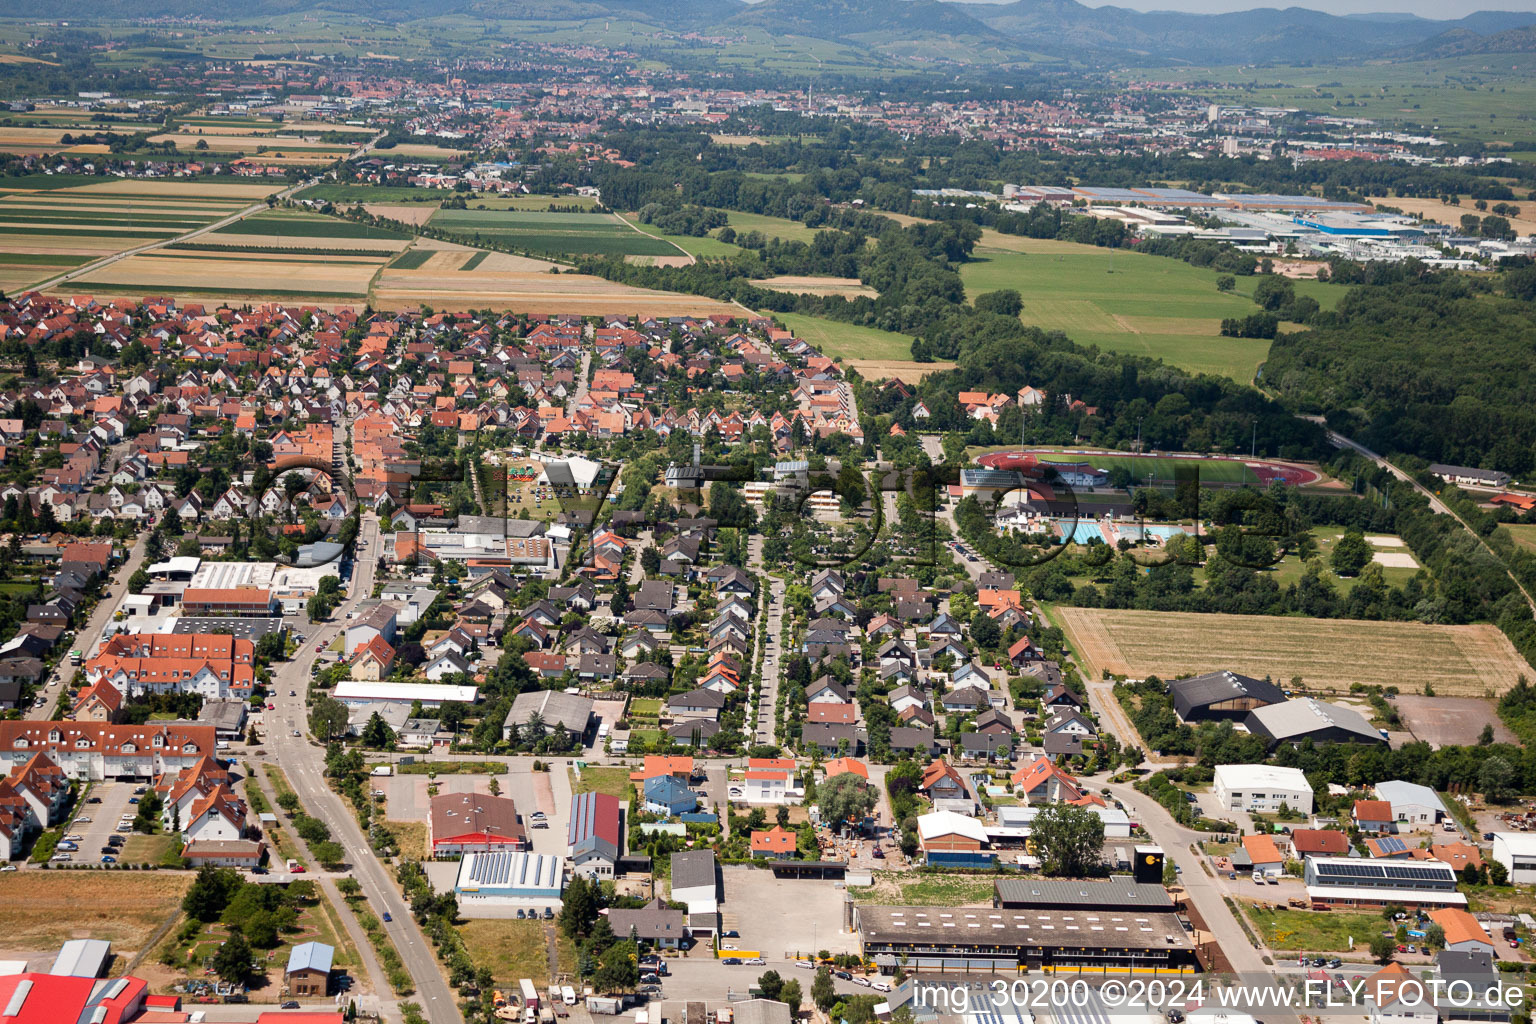 Drone image of Offenbach an der Queich in the state Rhineland-Palatinate, Germany